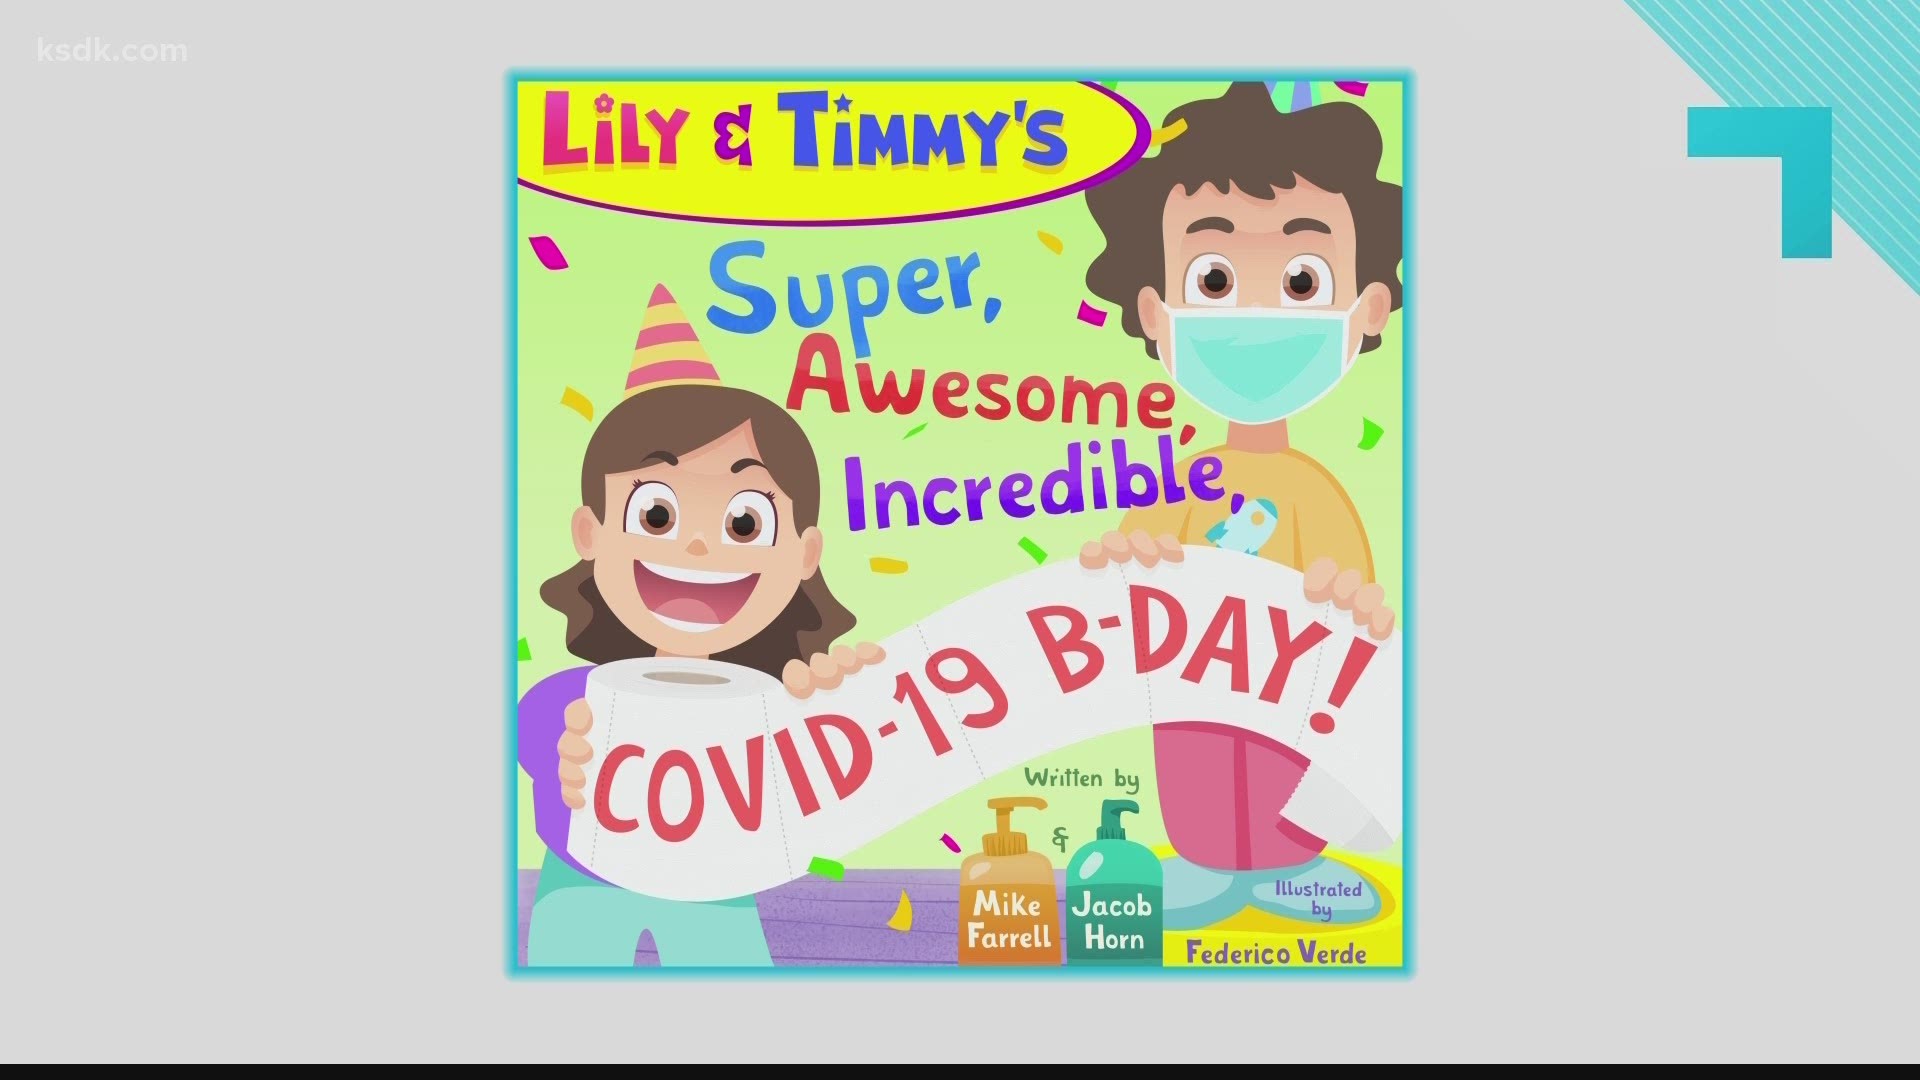 ‘Lily & Timmy’s Super, Awesome, Incredible COVID-19 B-day’ is written as a children’s story, however, it’s very much a book for adults, too.